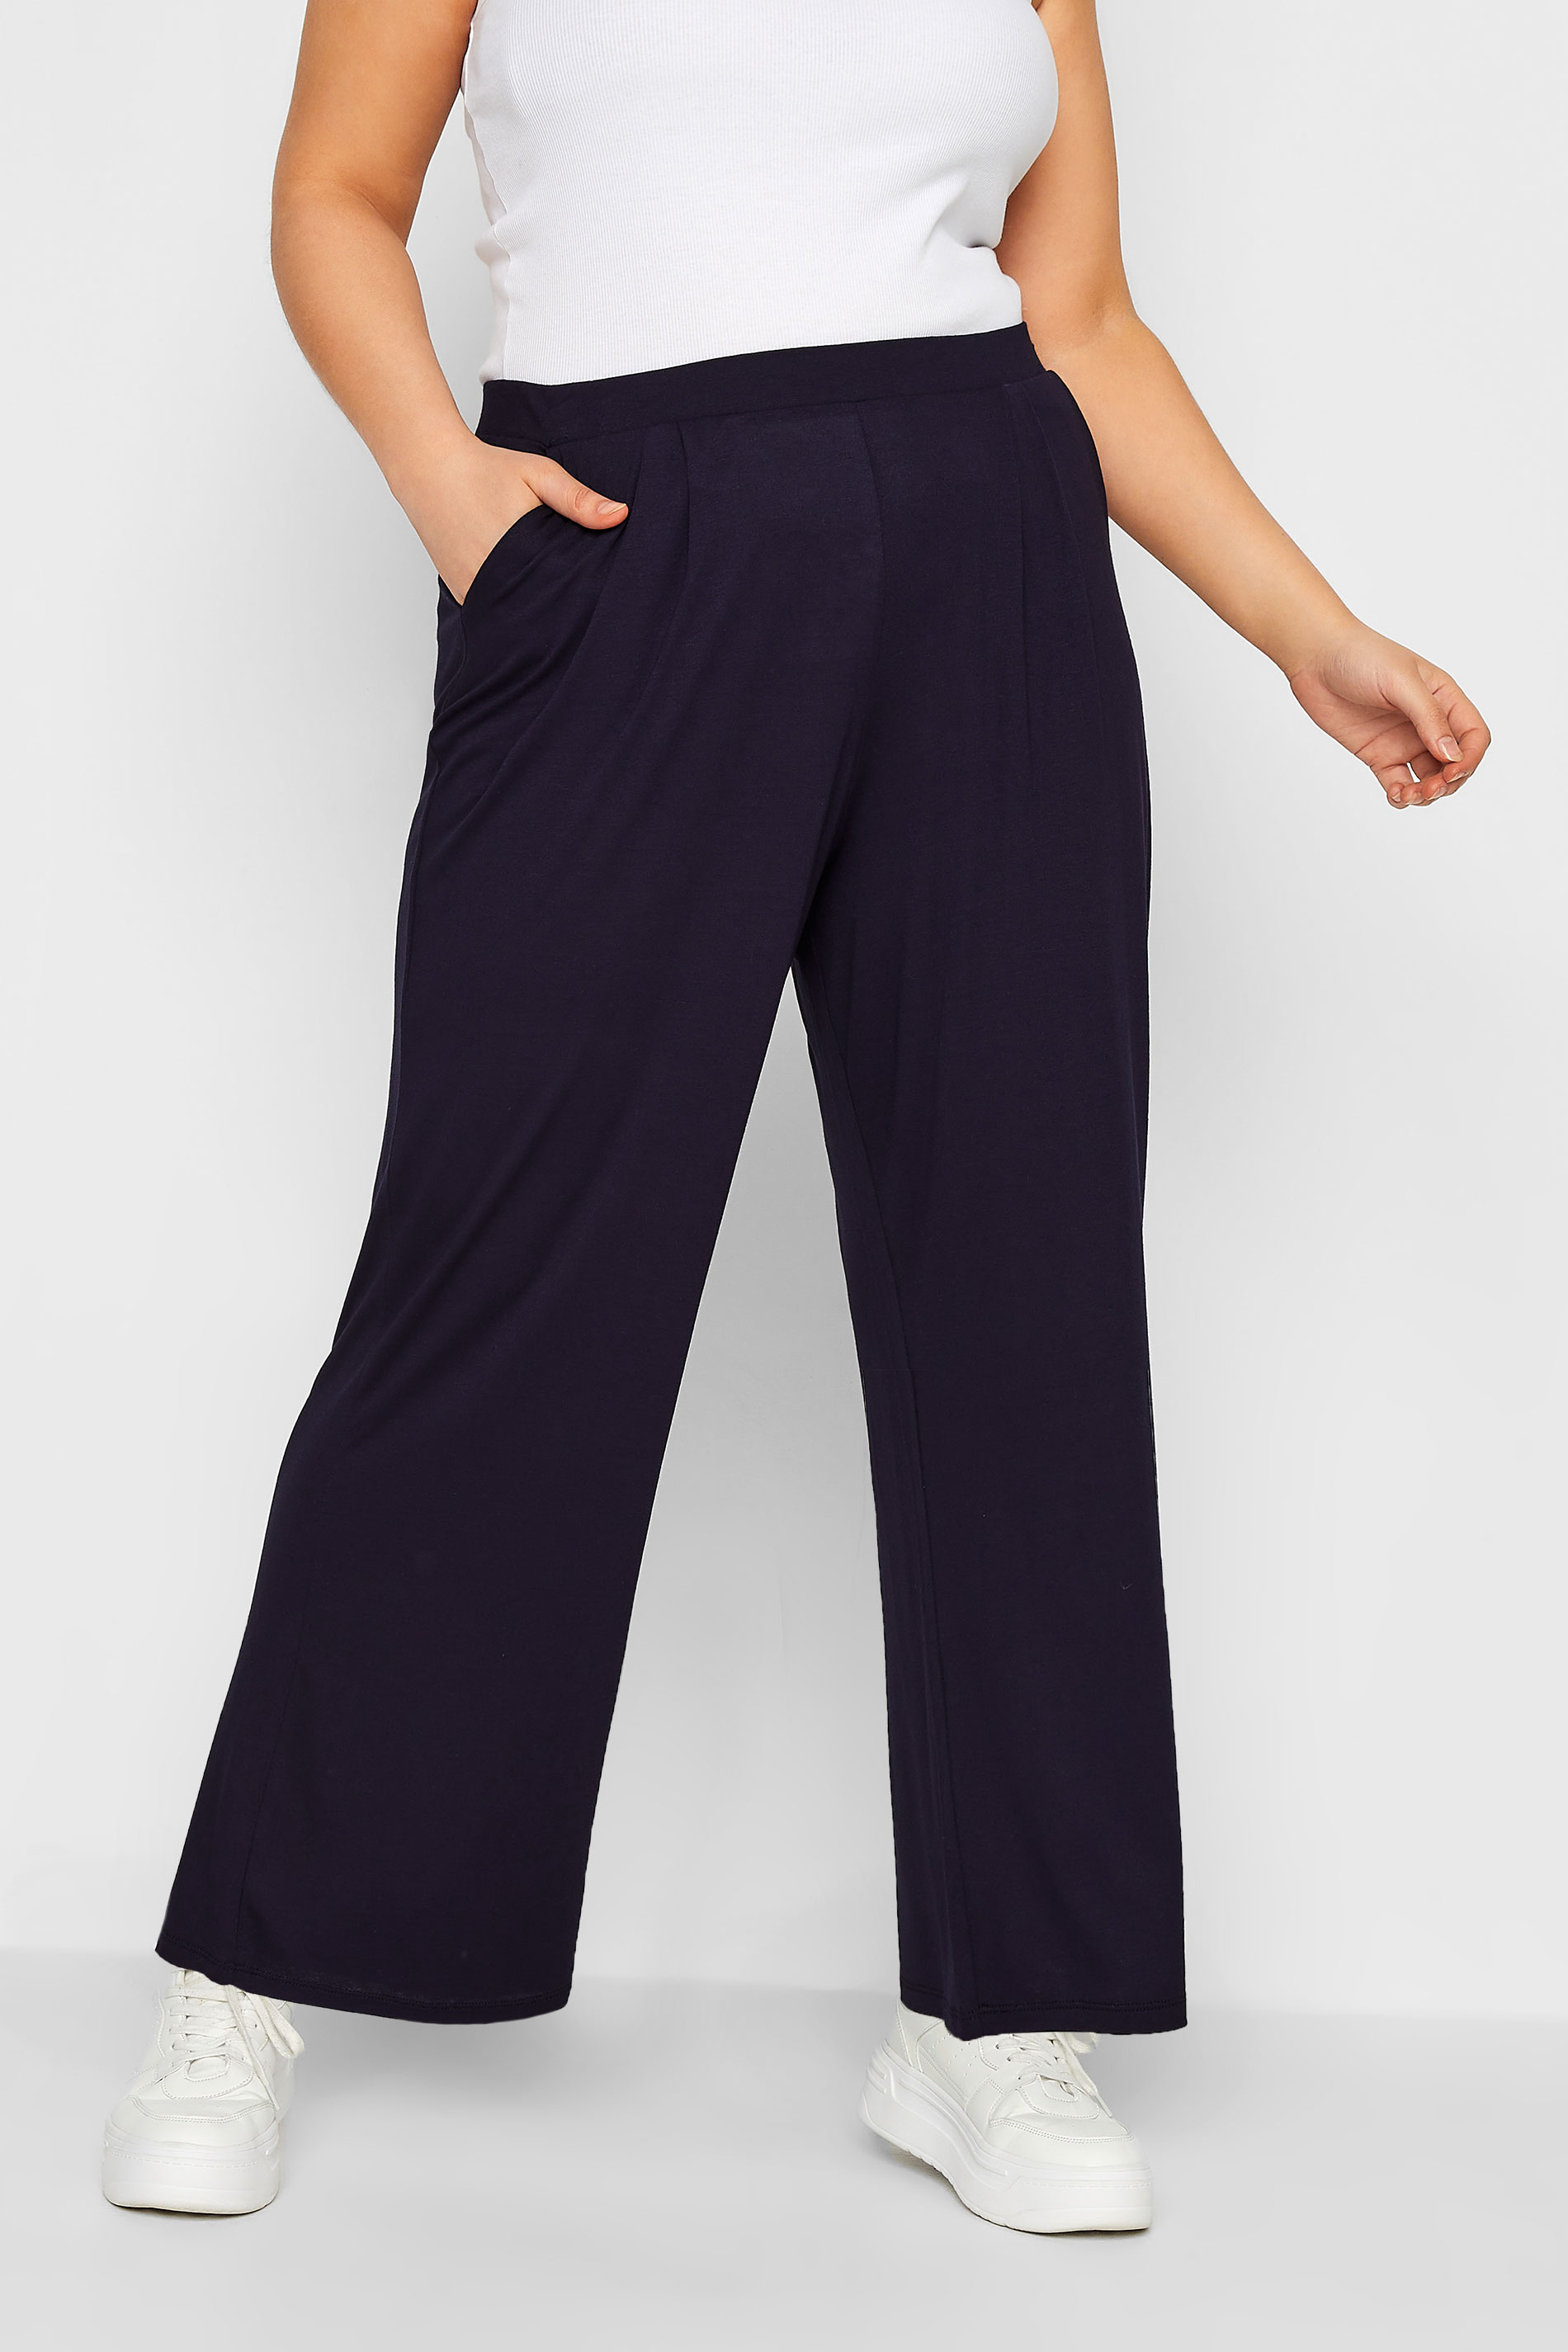 YOURS Plus Size Navy Blue Pleat Stretch Wide Leg Trousers | Yours Clothing 1